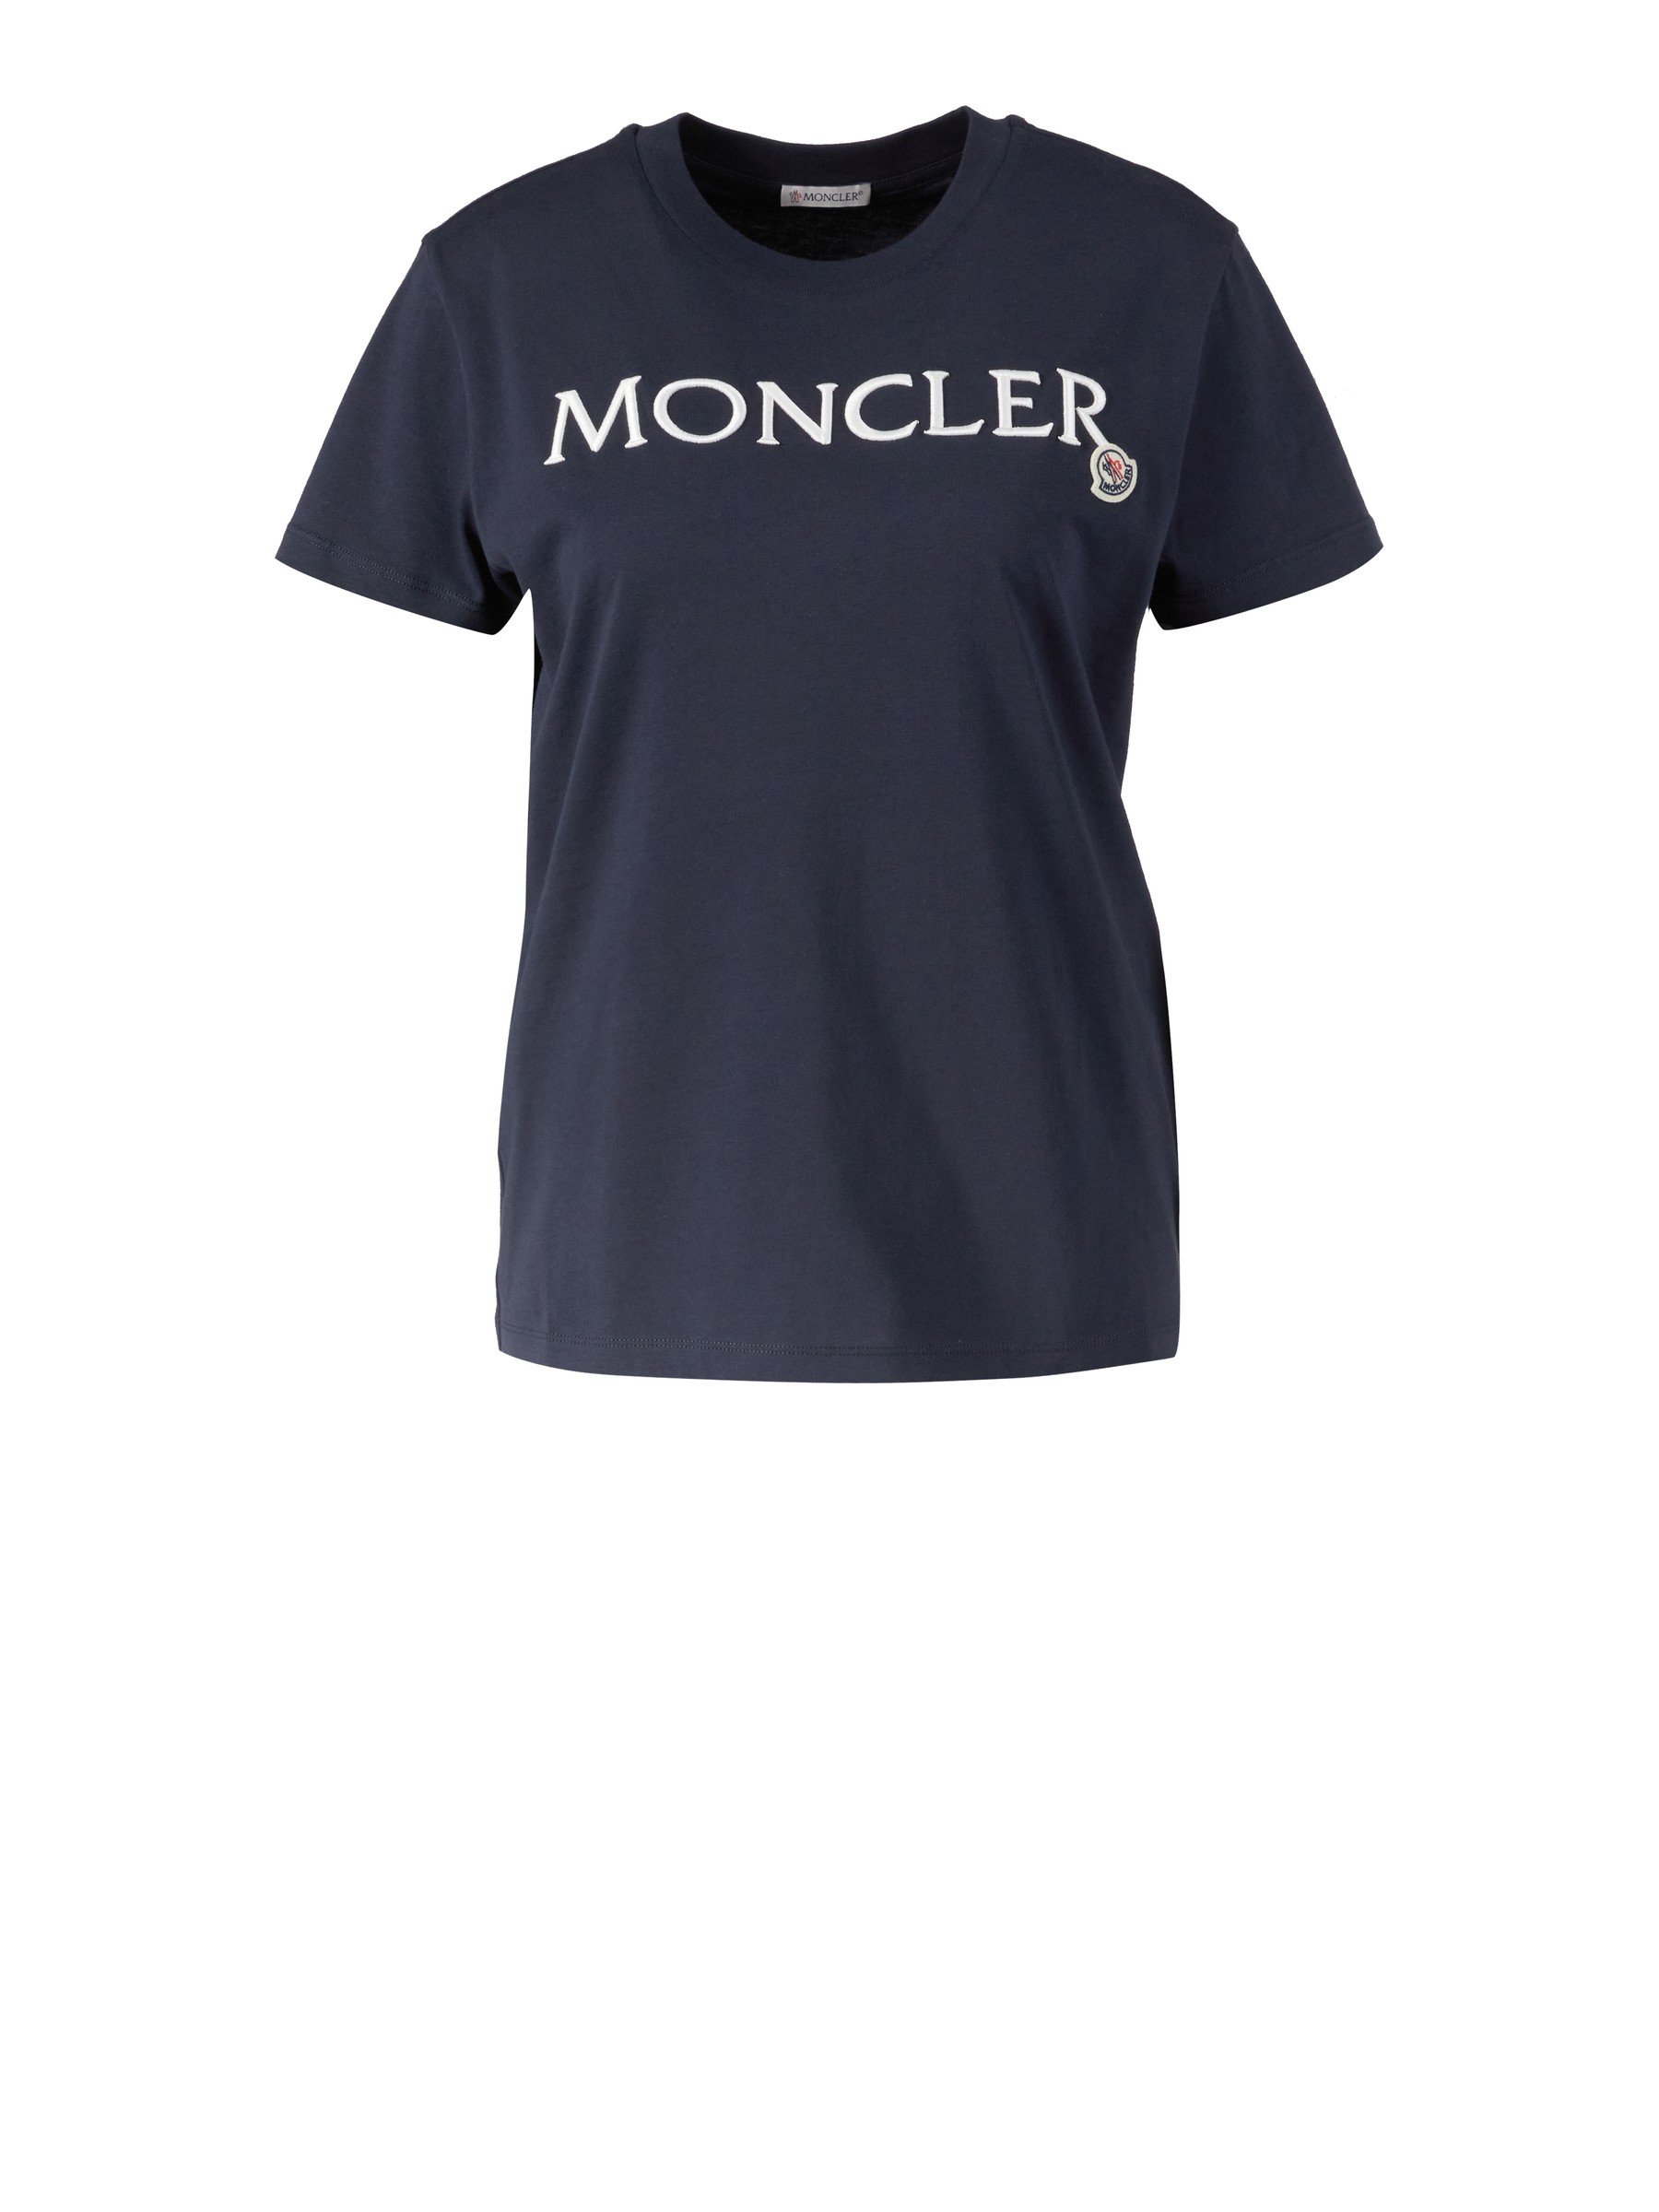 Moncler T-shirt with embroidered logo navy blue | T-shirts